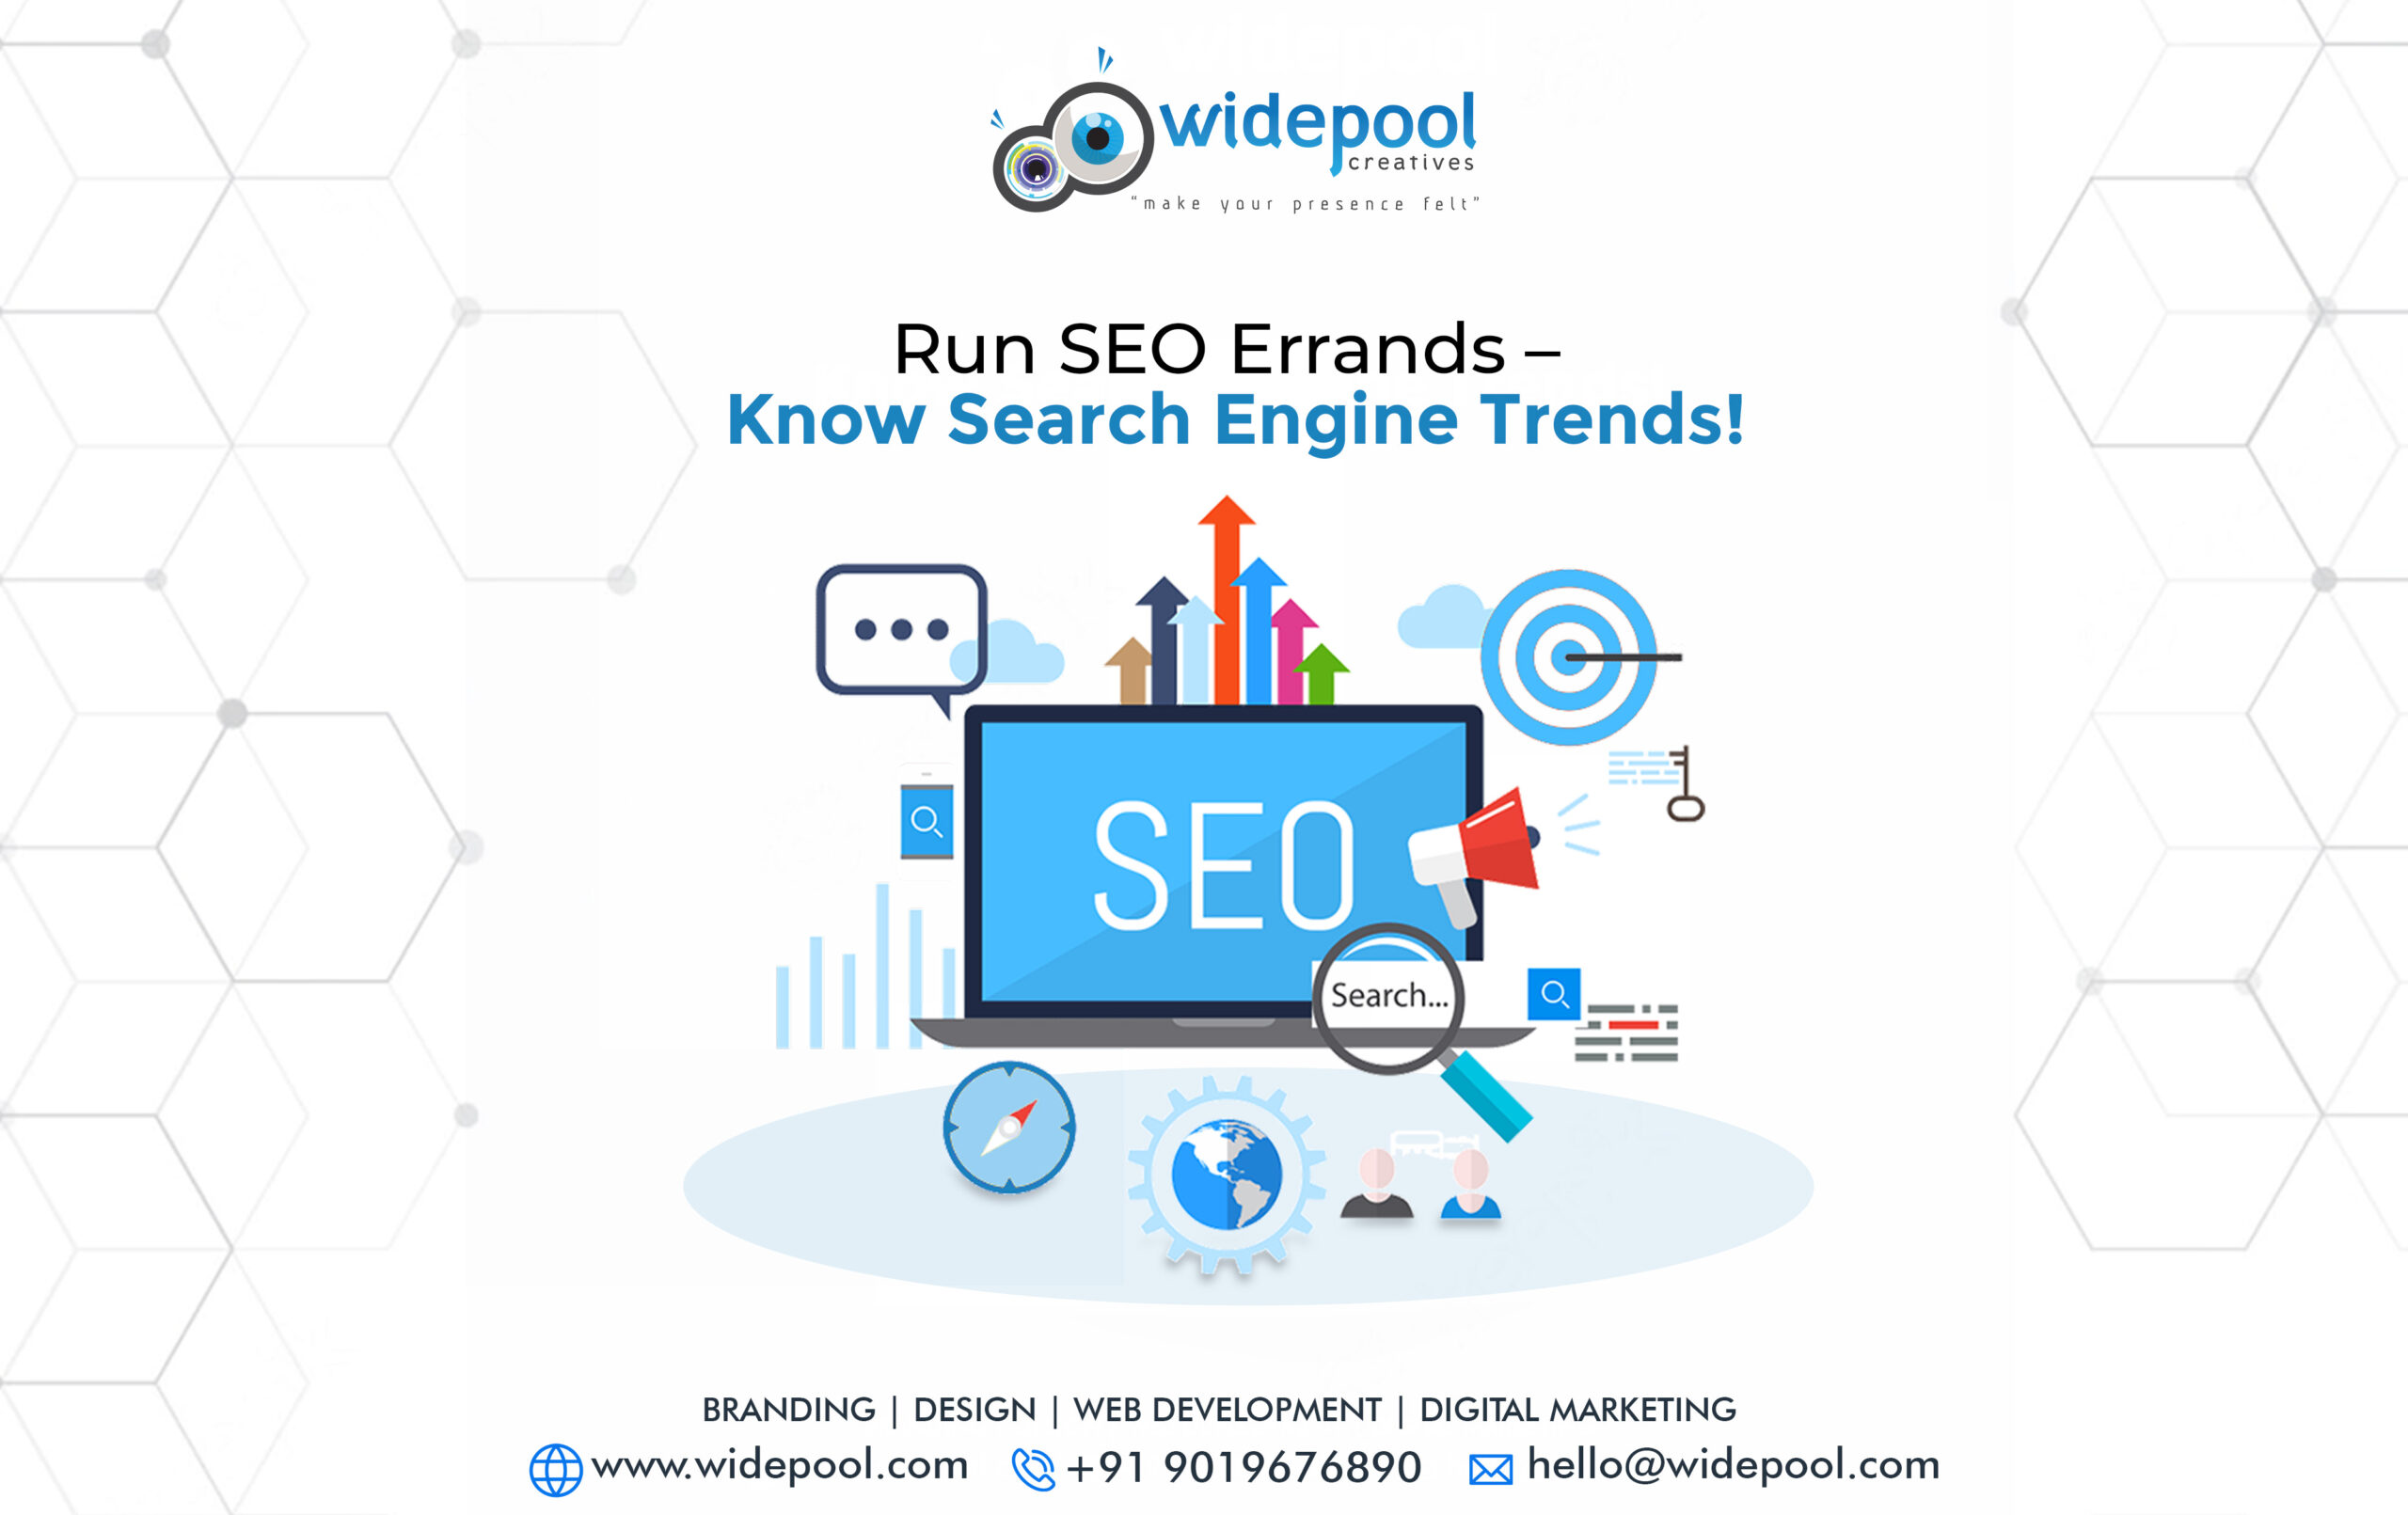 Run SEO Errands – Know Search Engine Trends!